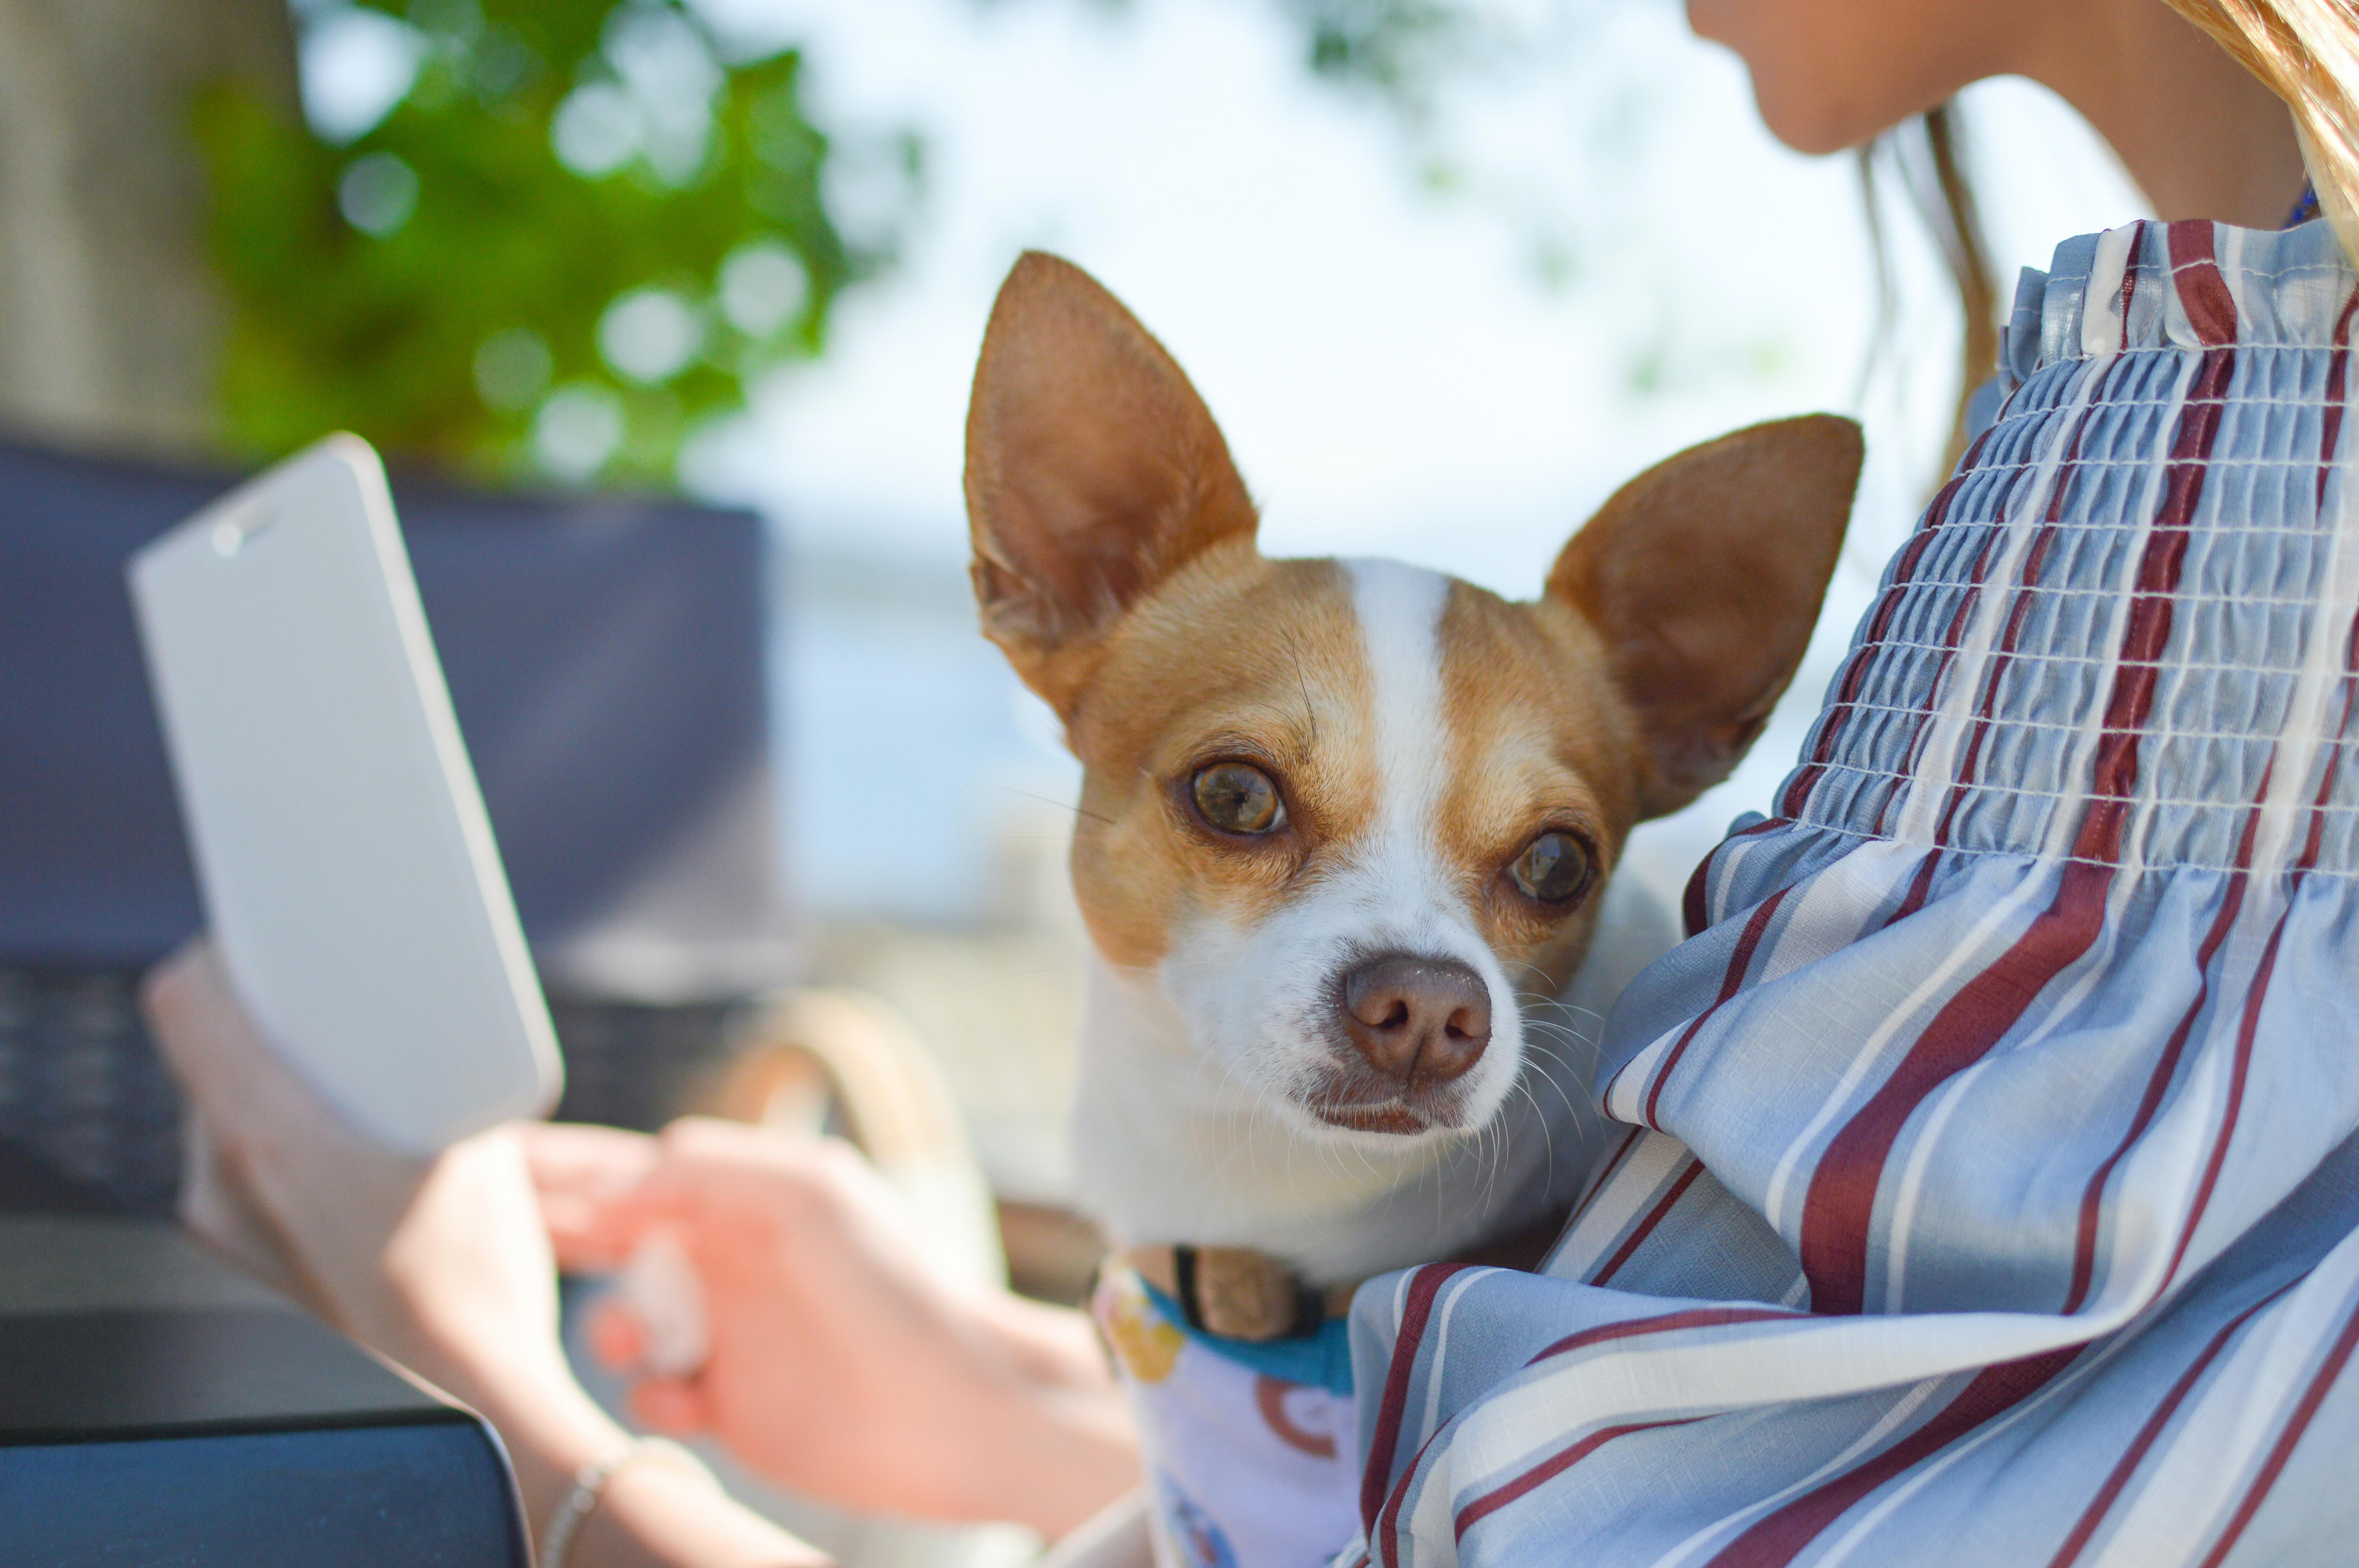 Groom Your Chihuahua: Tips for Keeping Your Pet Looking Their Best